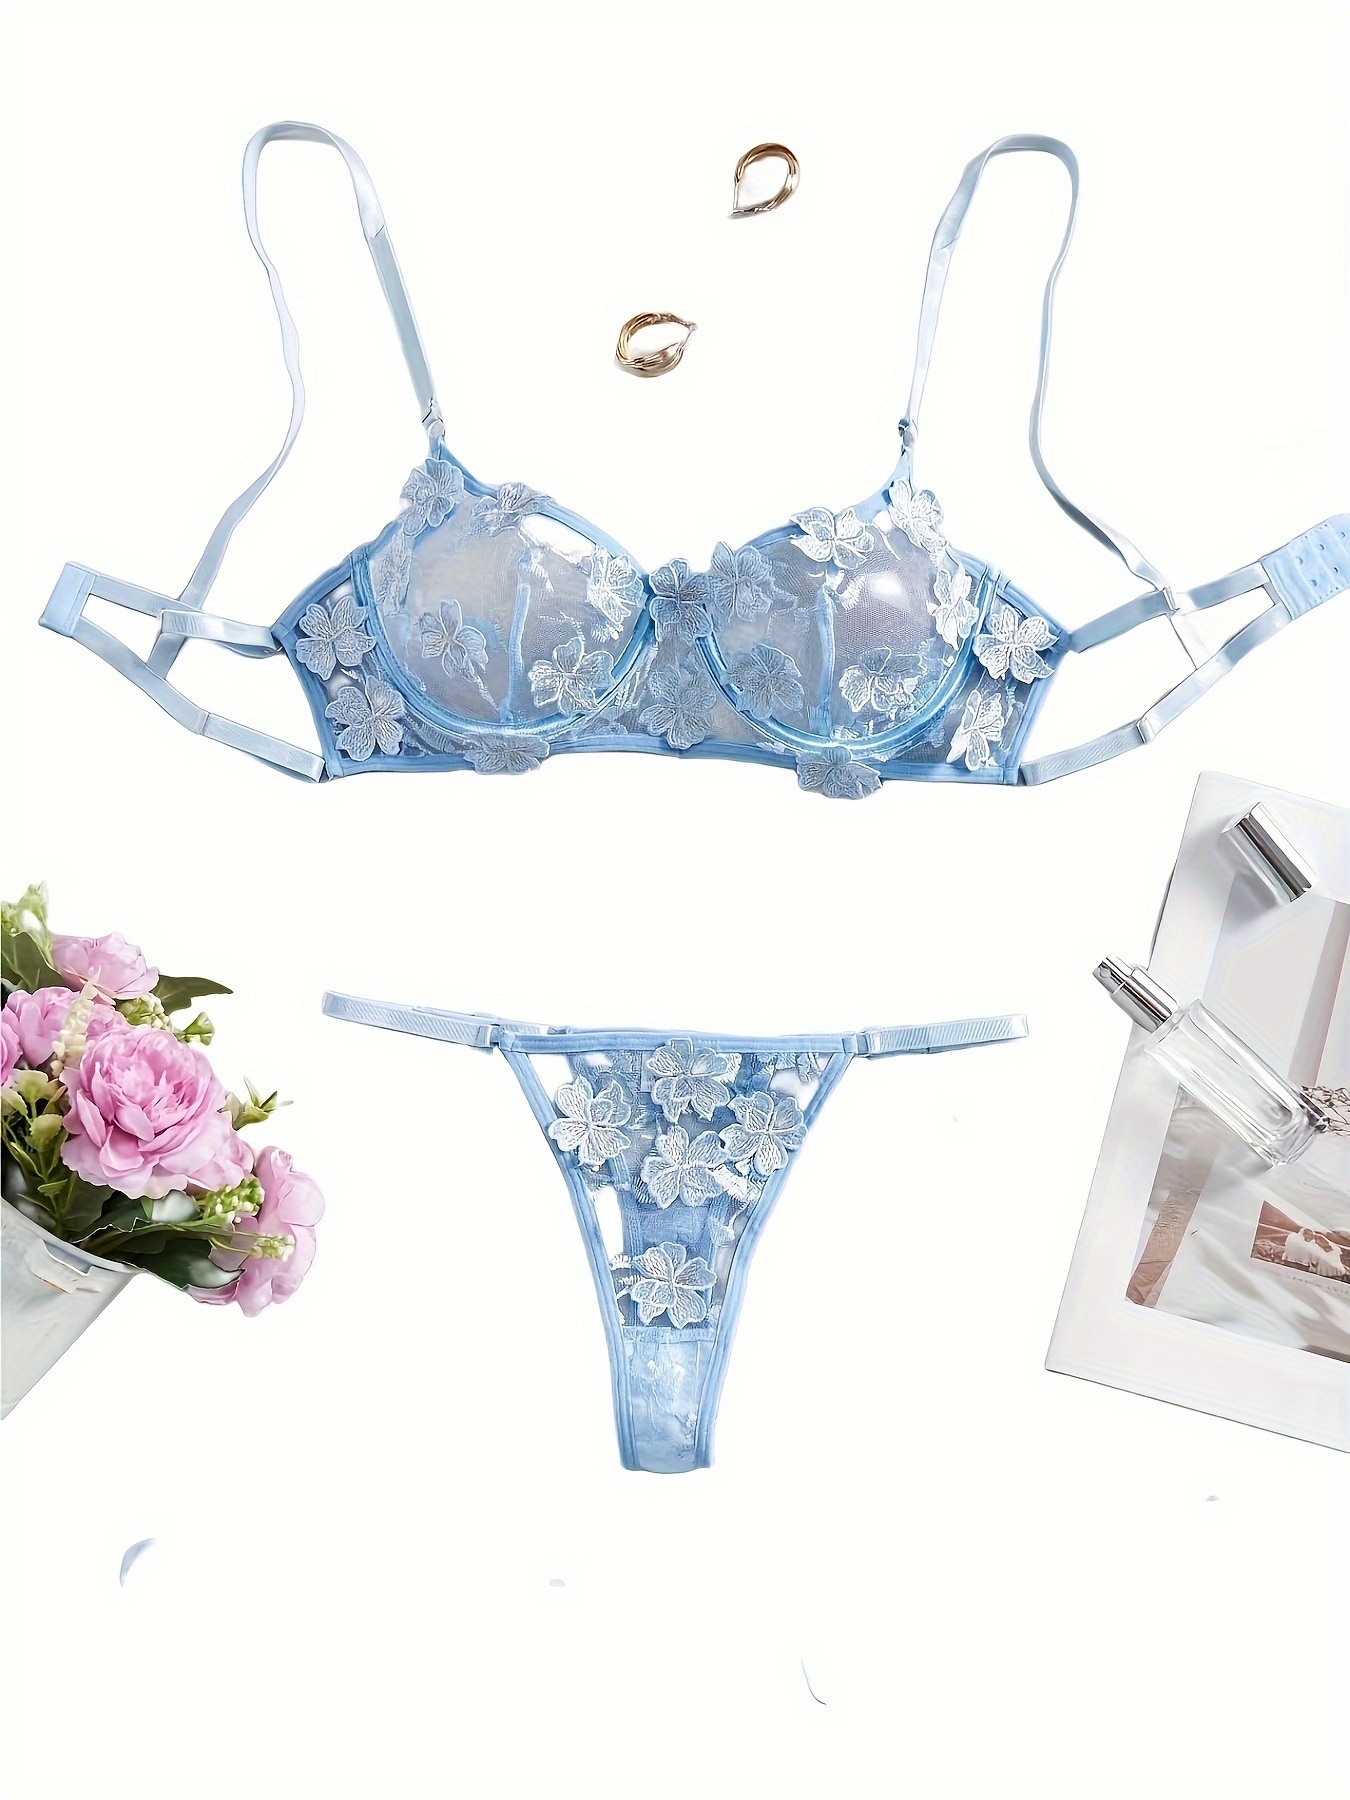 Floral Embroidery Semi Sheer Lingerie Set, Intimates Bra & Thong, Women's  Sexy Lingerie & Underwear